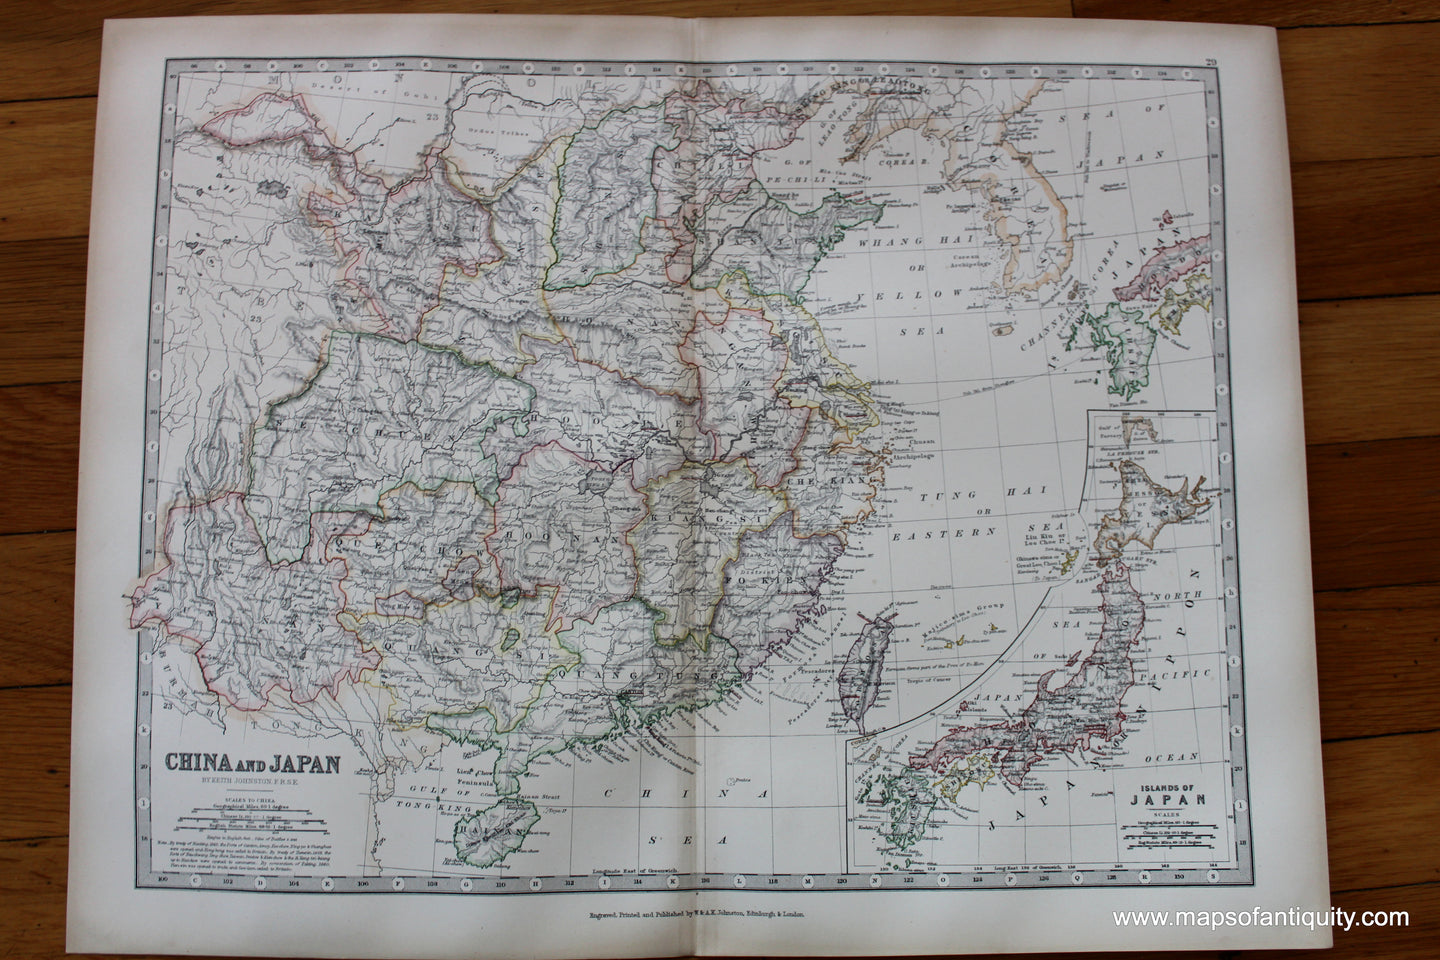 Antique-Printed-Color-Map-China-and-Japan-Asia-China-&-Japan-1881-Johnston-Maps-Of-Antiquity